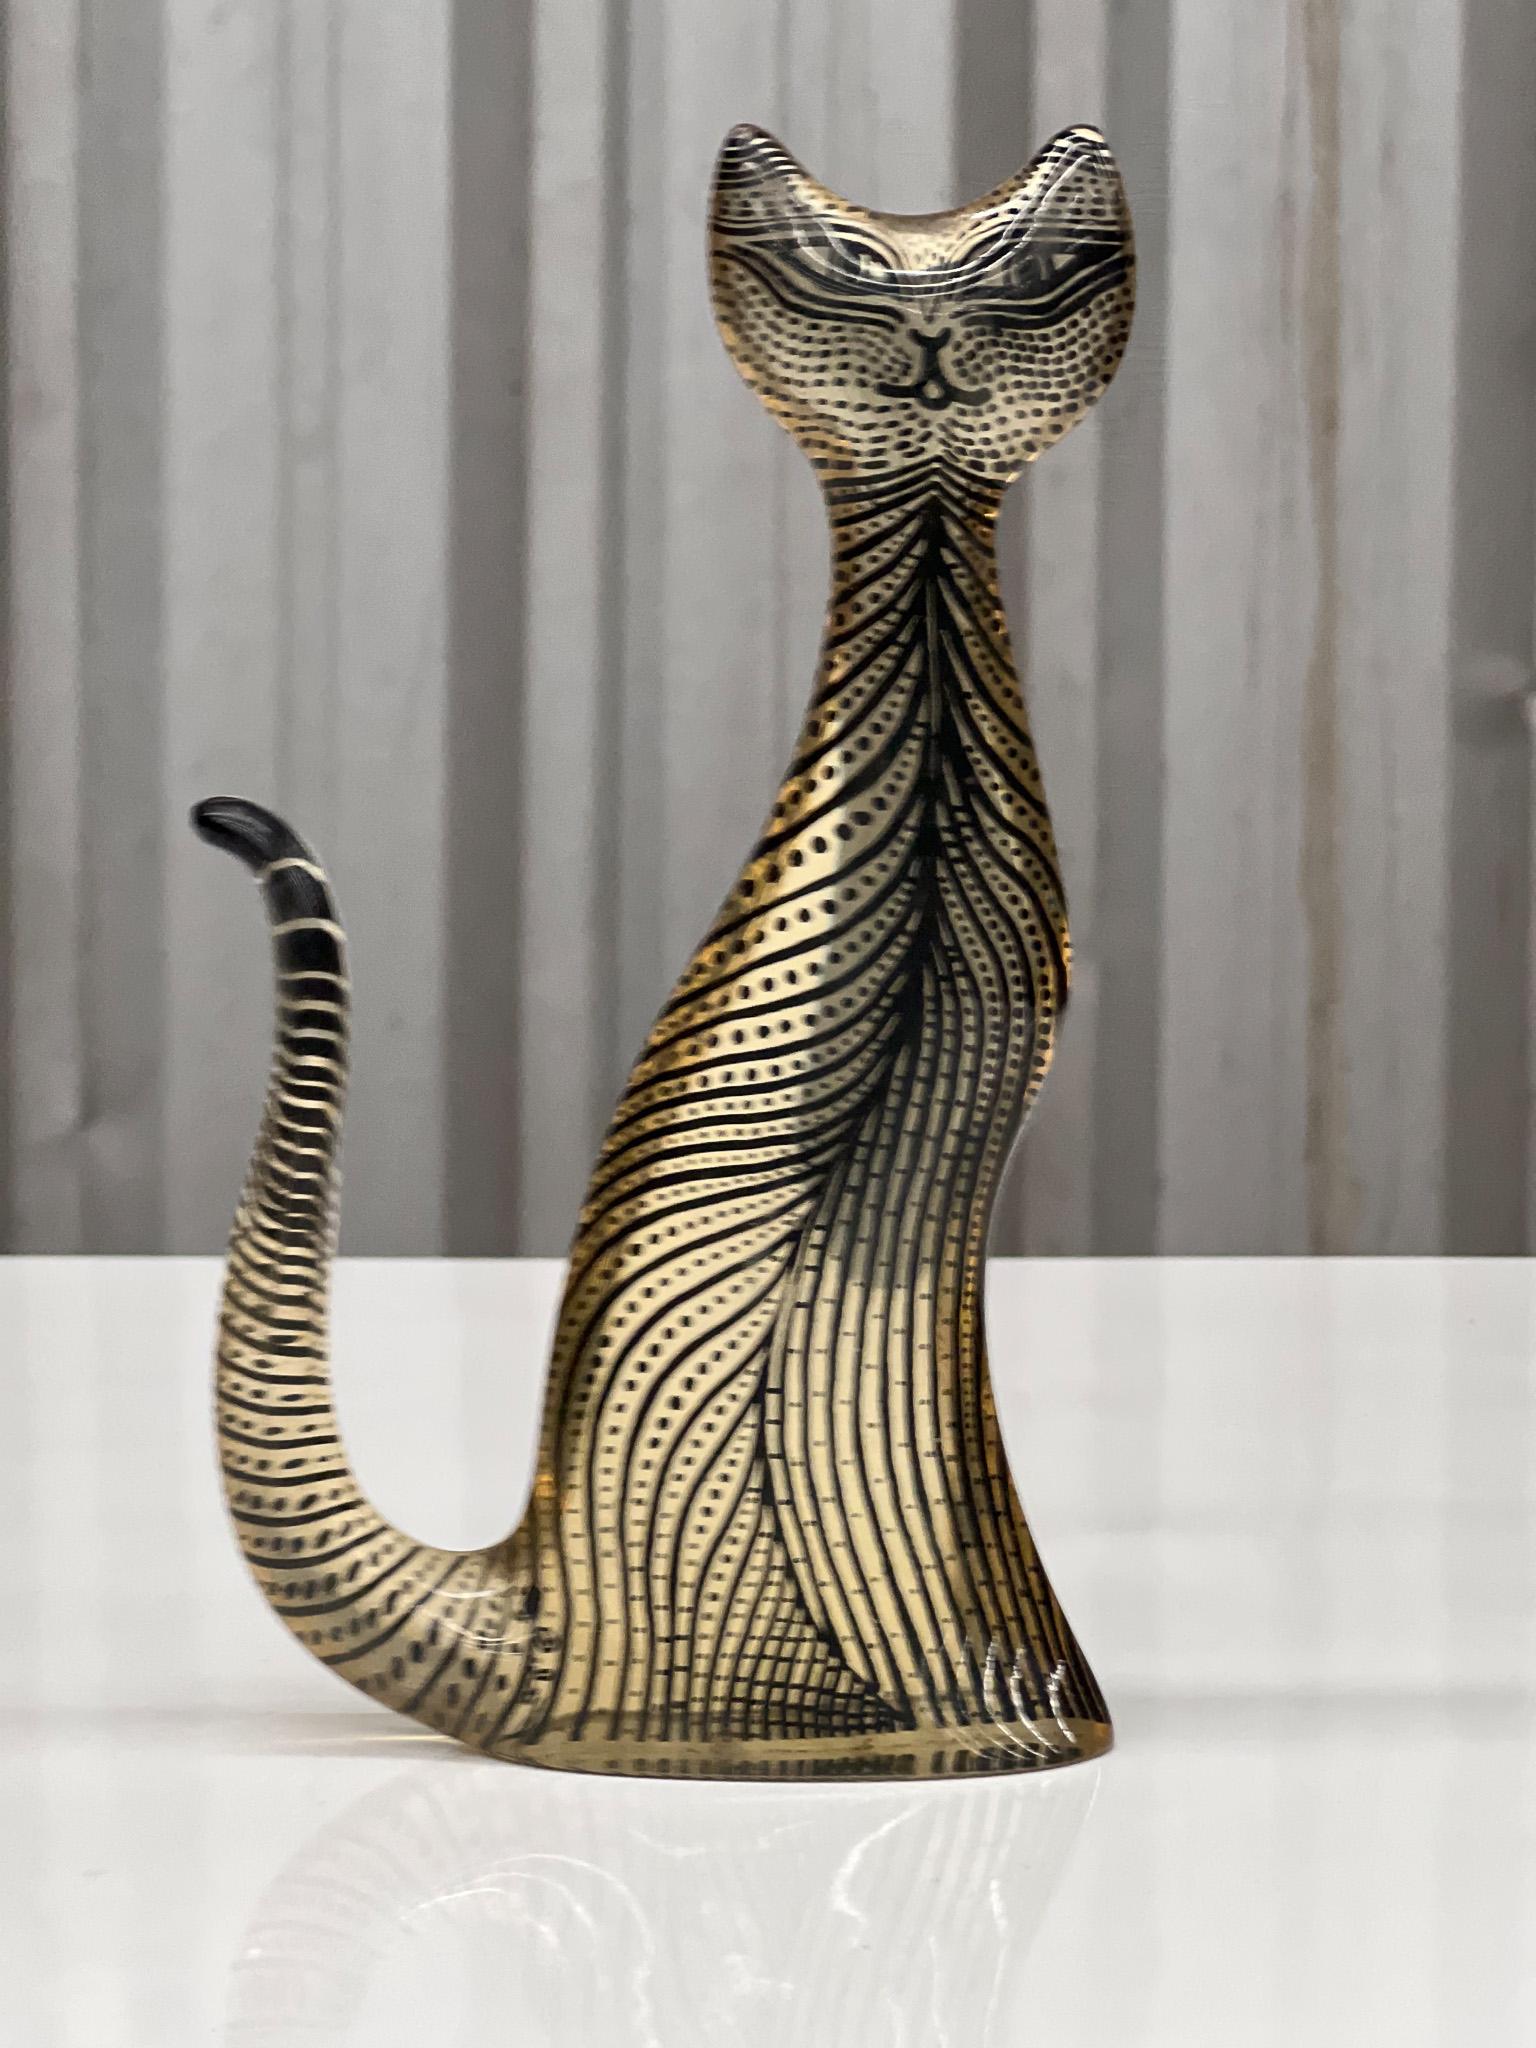 Mid-Century Modern Brazilian Modern Kinetic Sculpture of a Cat in Resin, Abraham Palatinik, 1960s For Sale